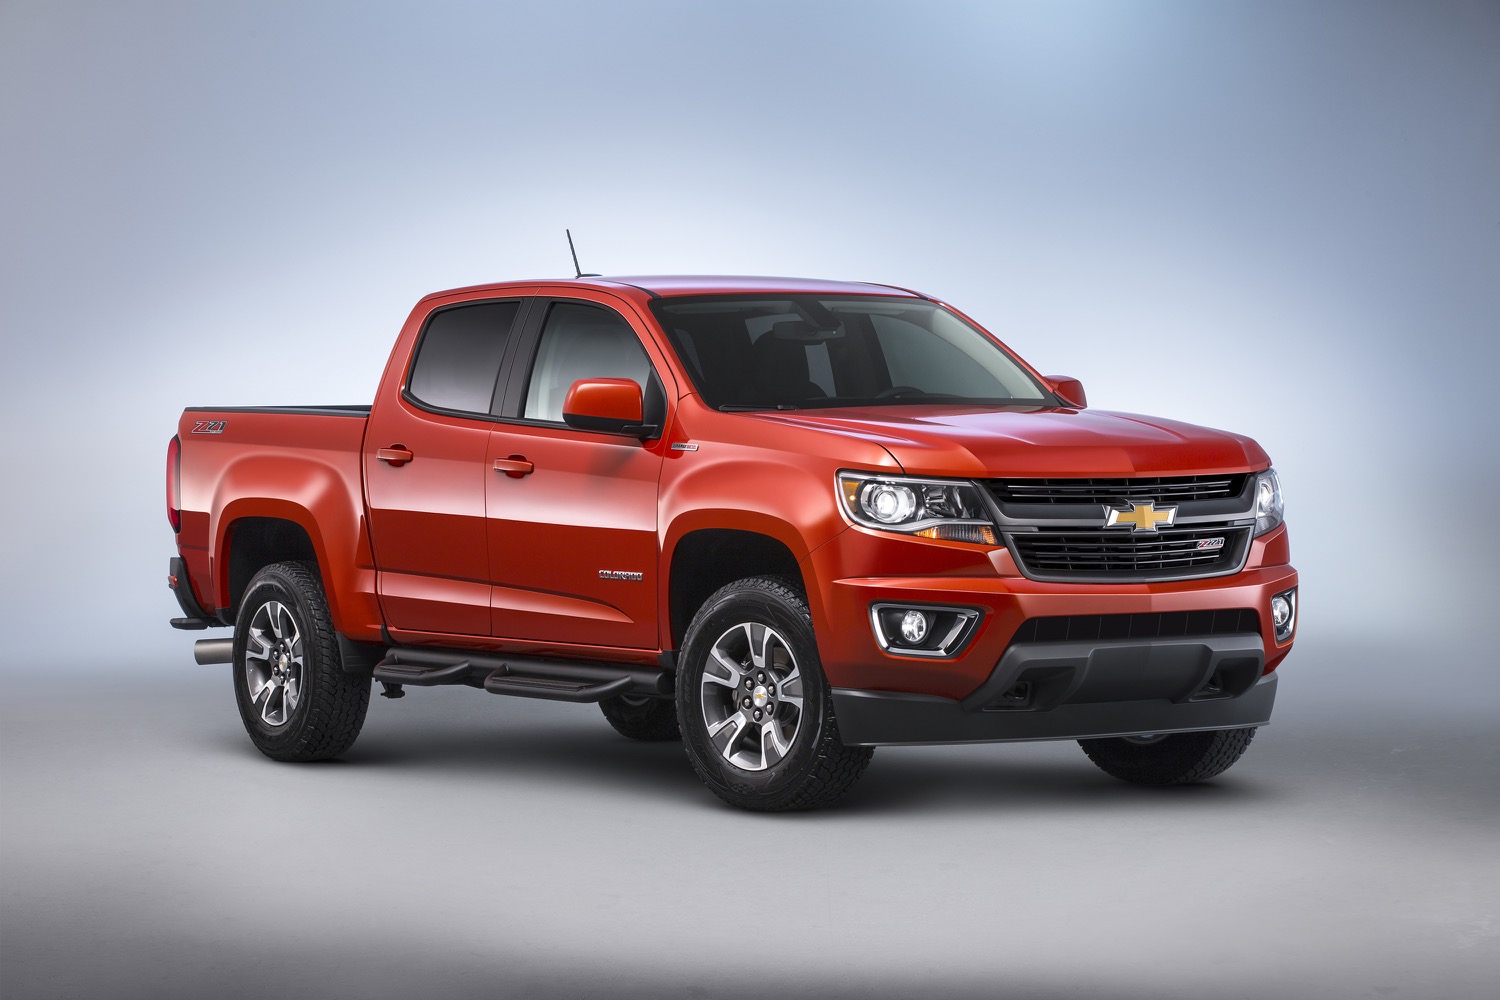 2016 Chevy Colorado Diesel Pickup Priced At $31,700; Fuel Efficiency To  Come Later